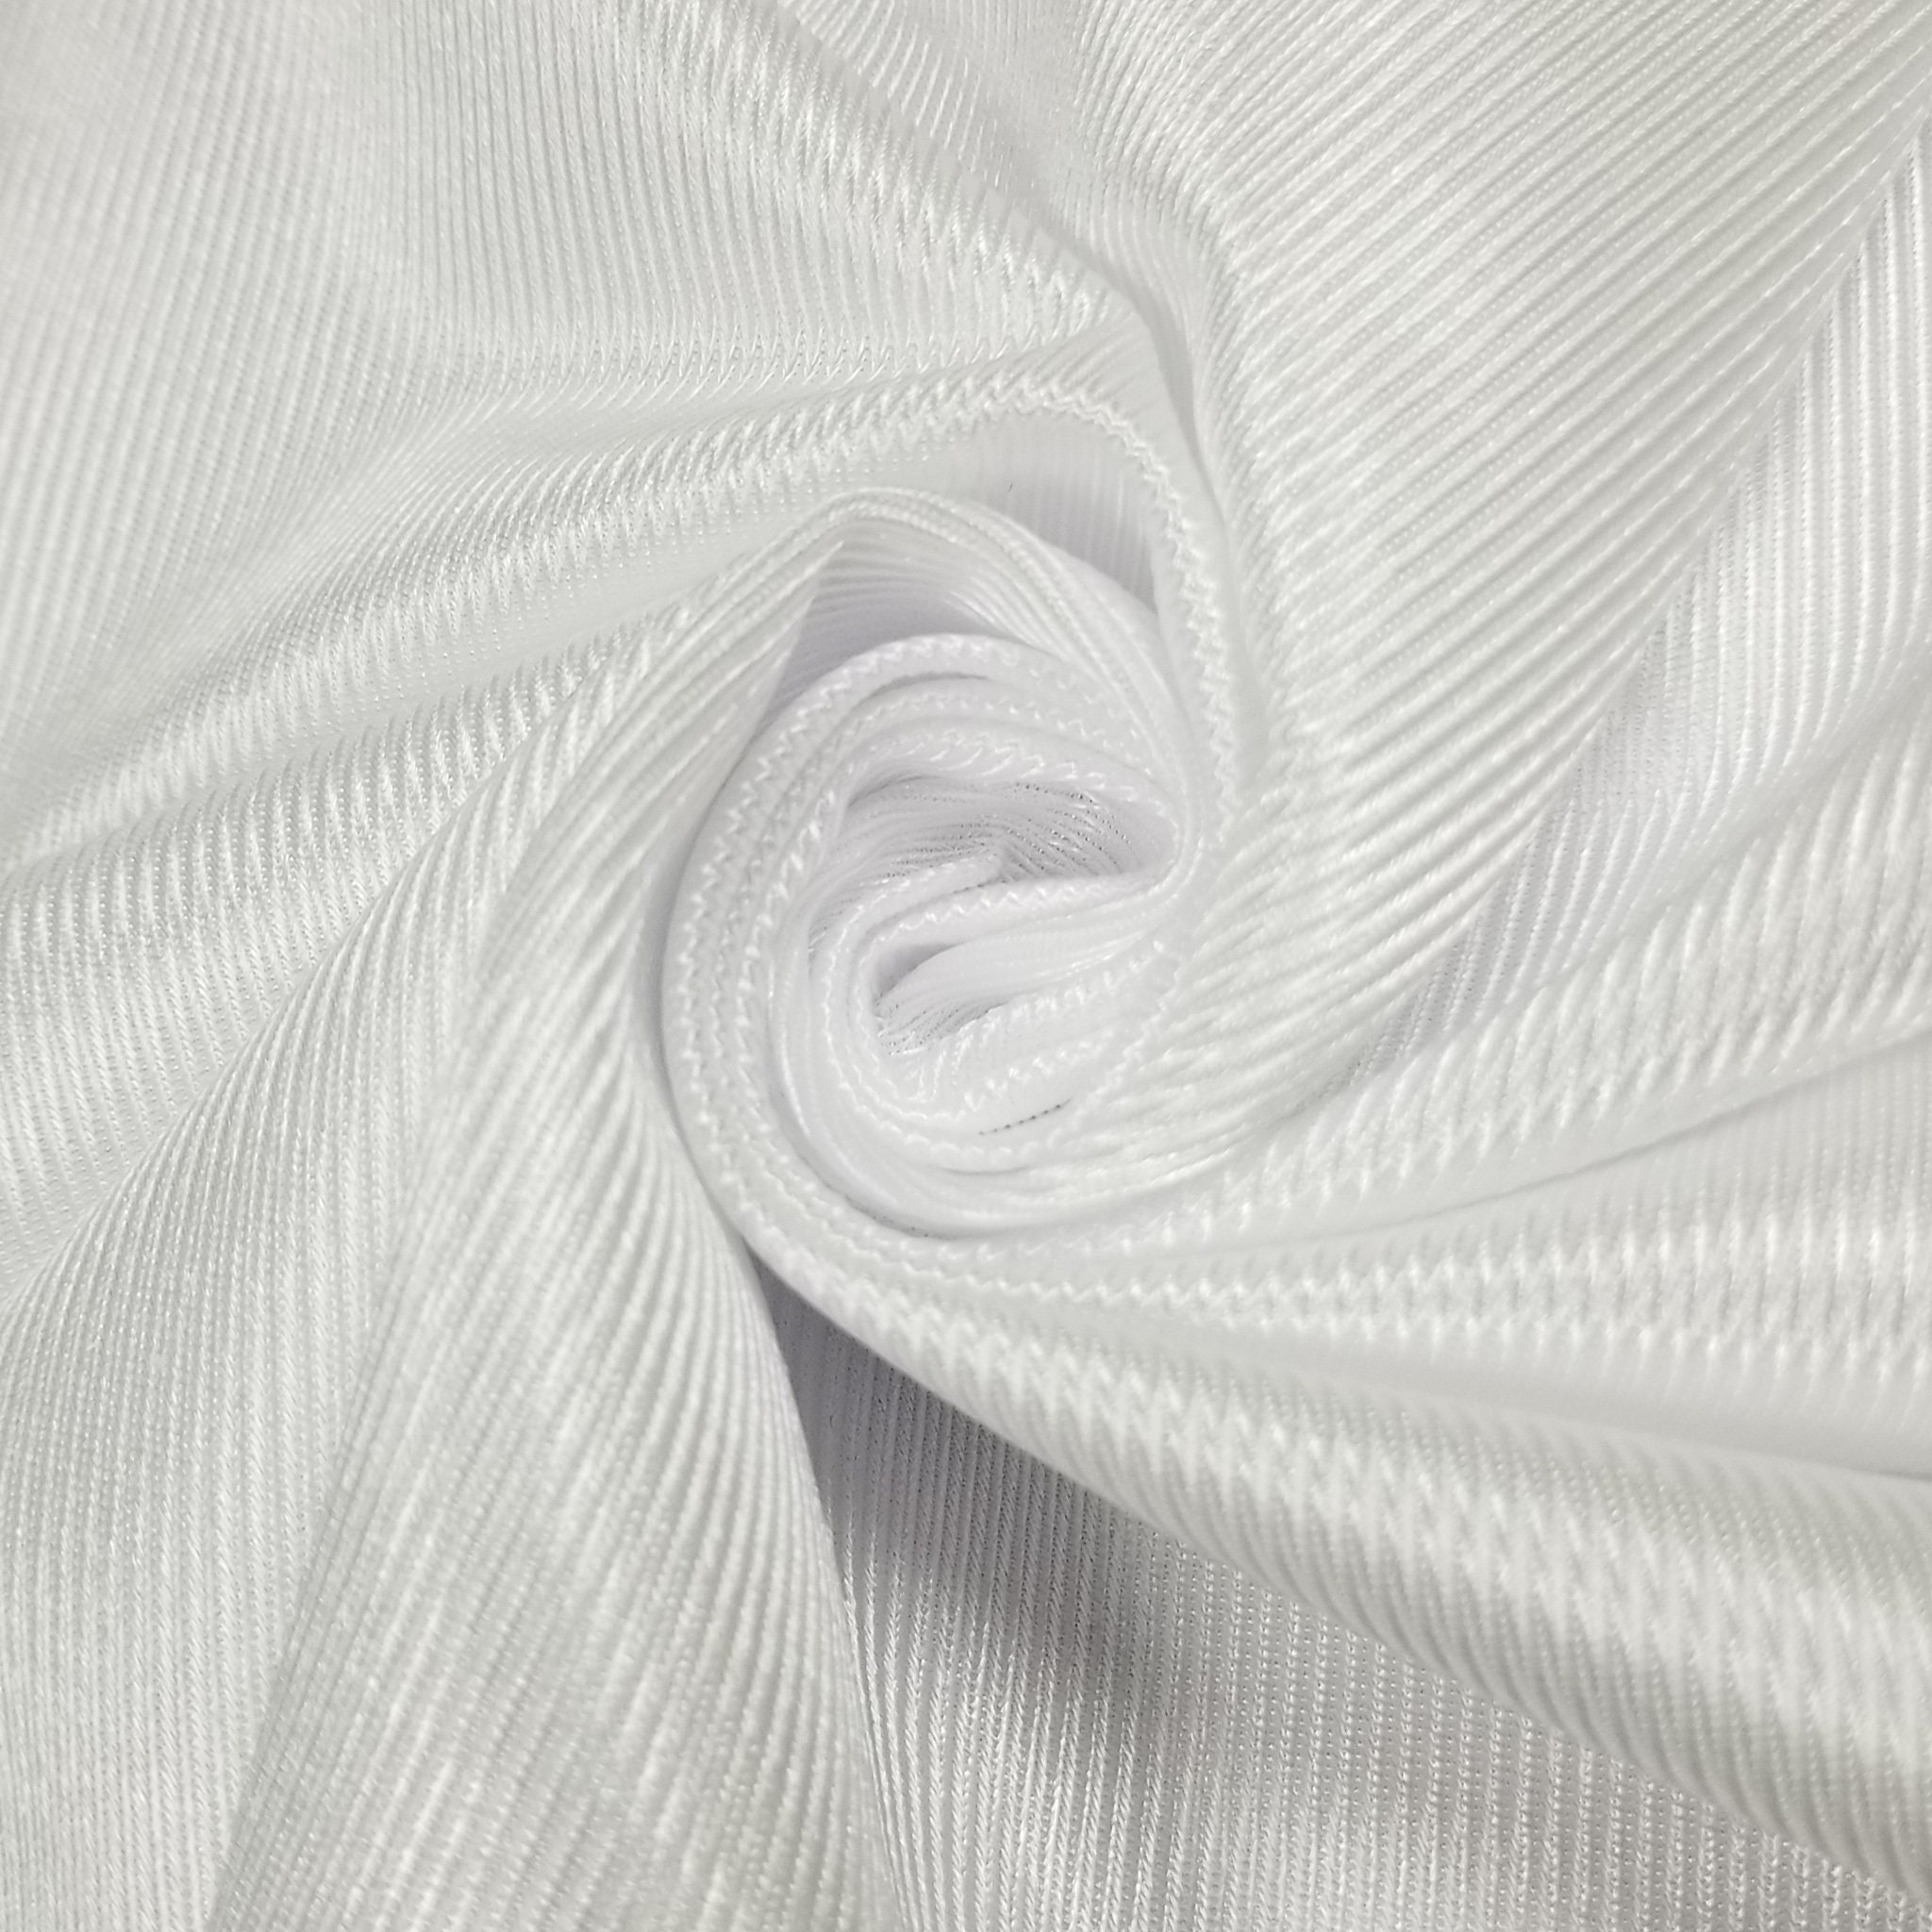  White Power Mesh Fabric - by The Yard : Arts, Crafts & Sewing